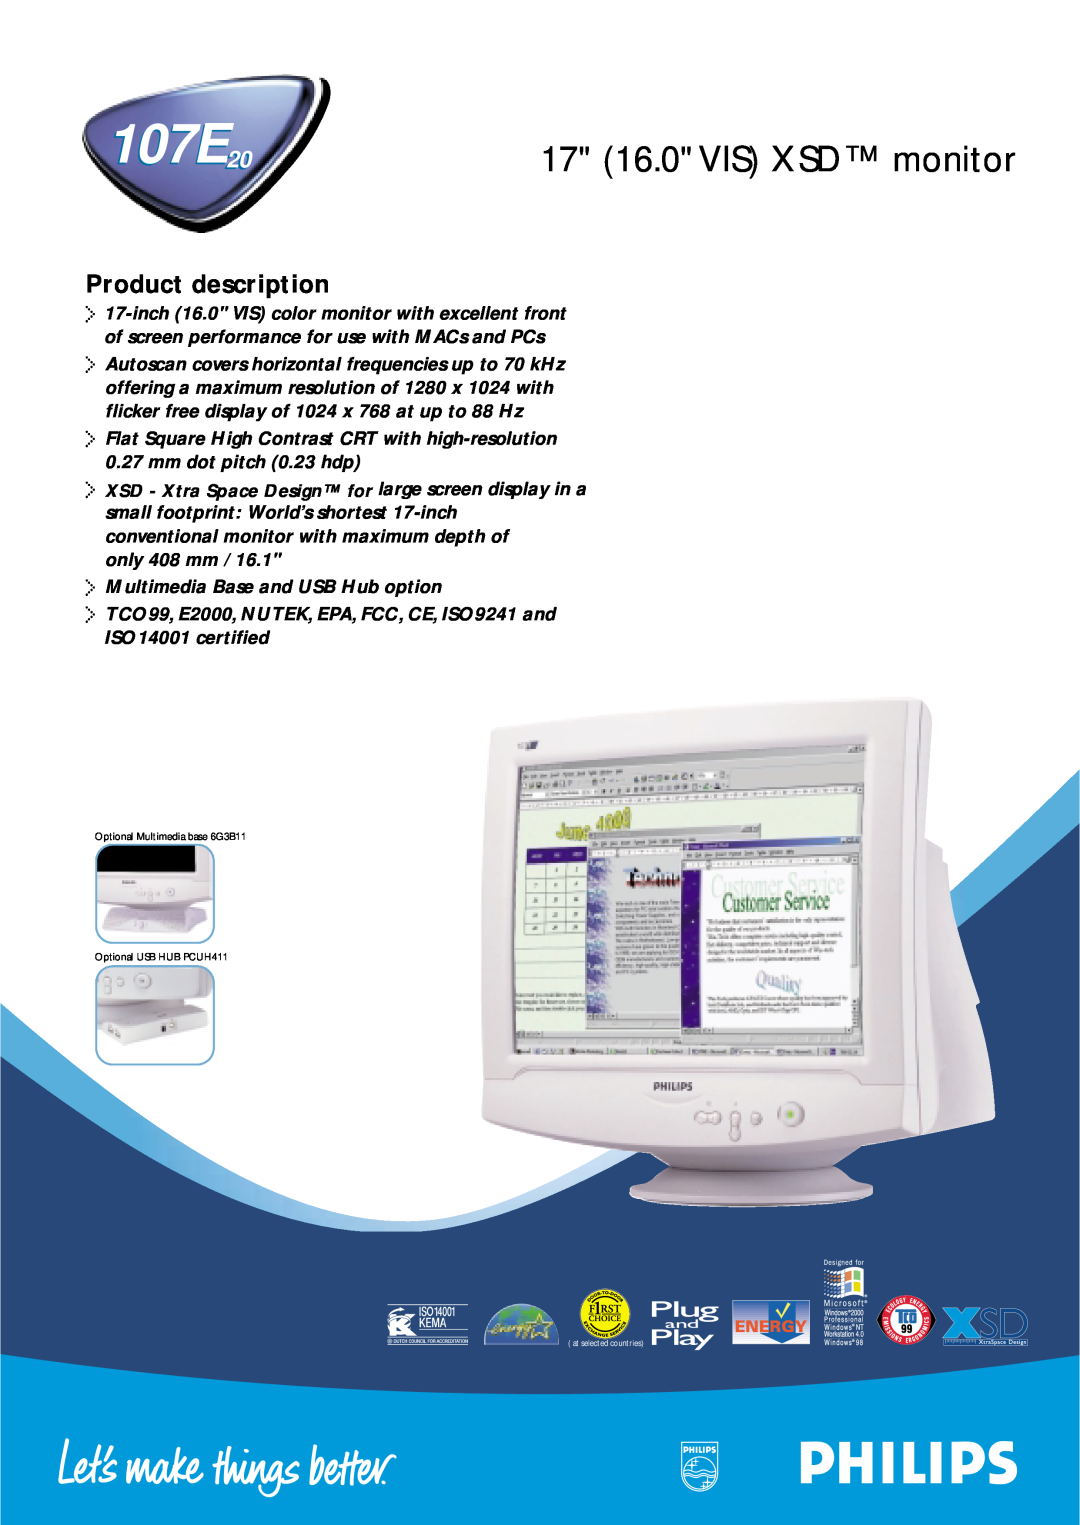 Philips 107E20 manual 17 16.0 VIS XSD monitor, Product description, 0.27mm dot pitch 0.23 hdp 